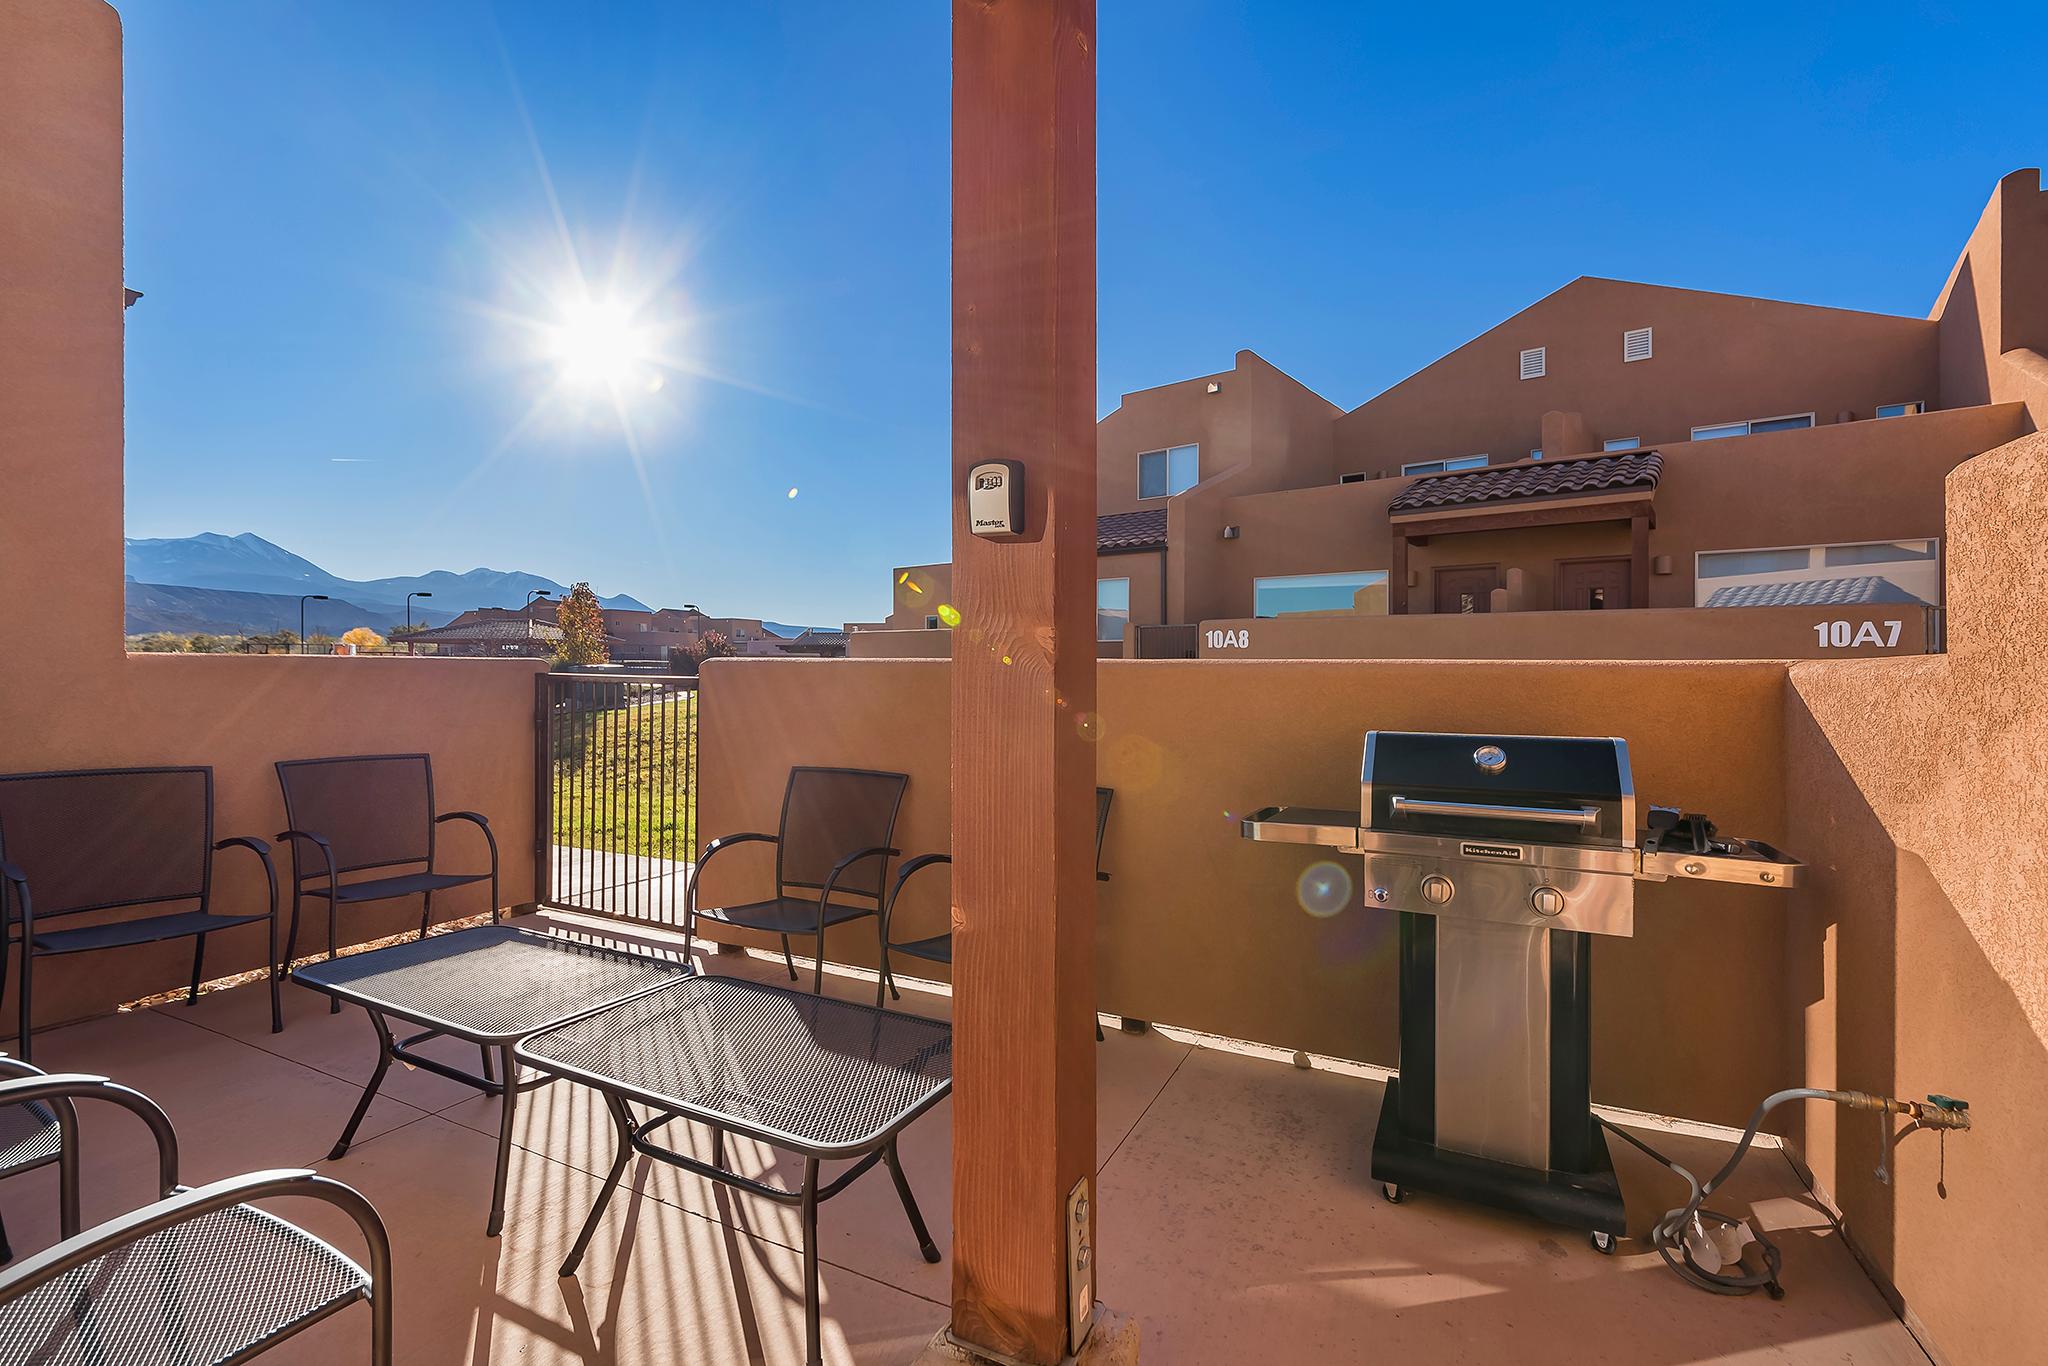 Beautiful outdoor space for grilling and dining. Our patio connects to the shared community amenities and the pool and hot tub